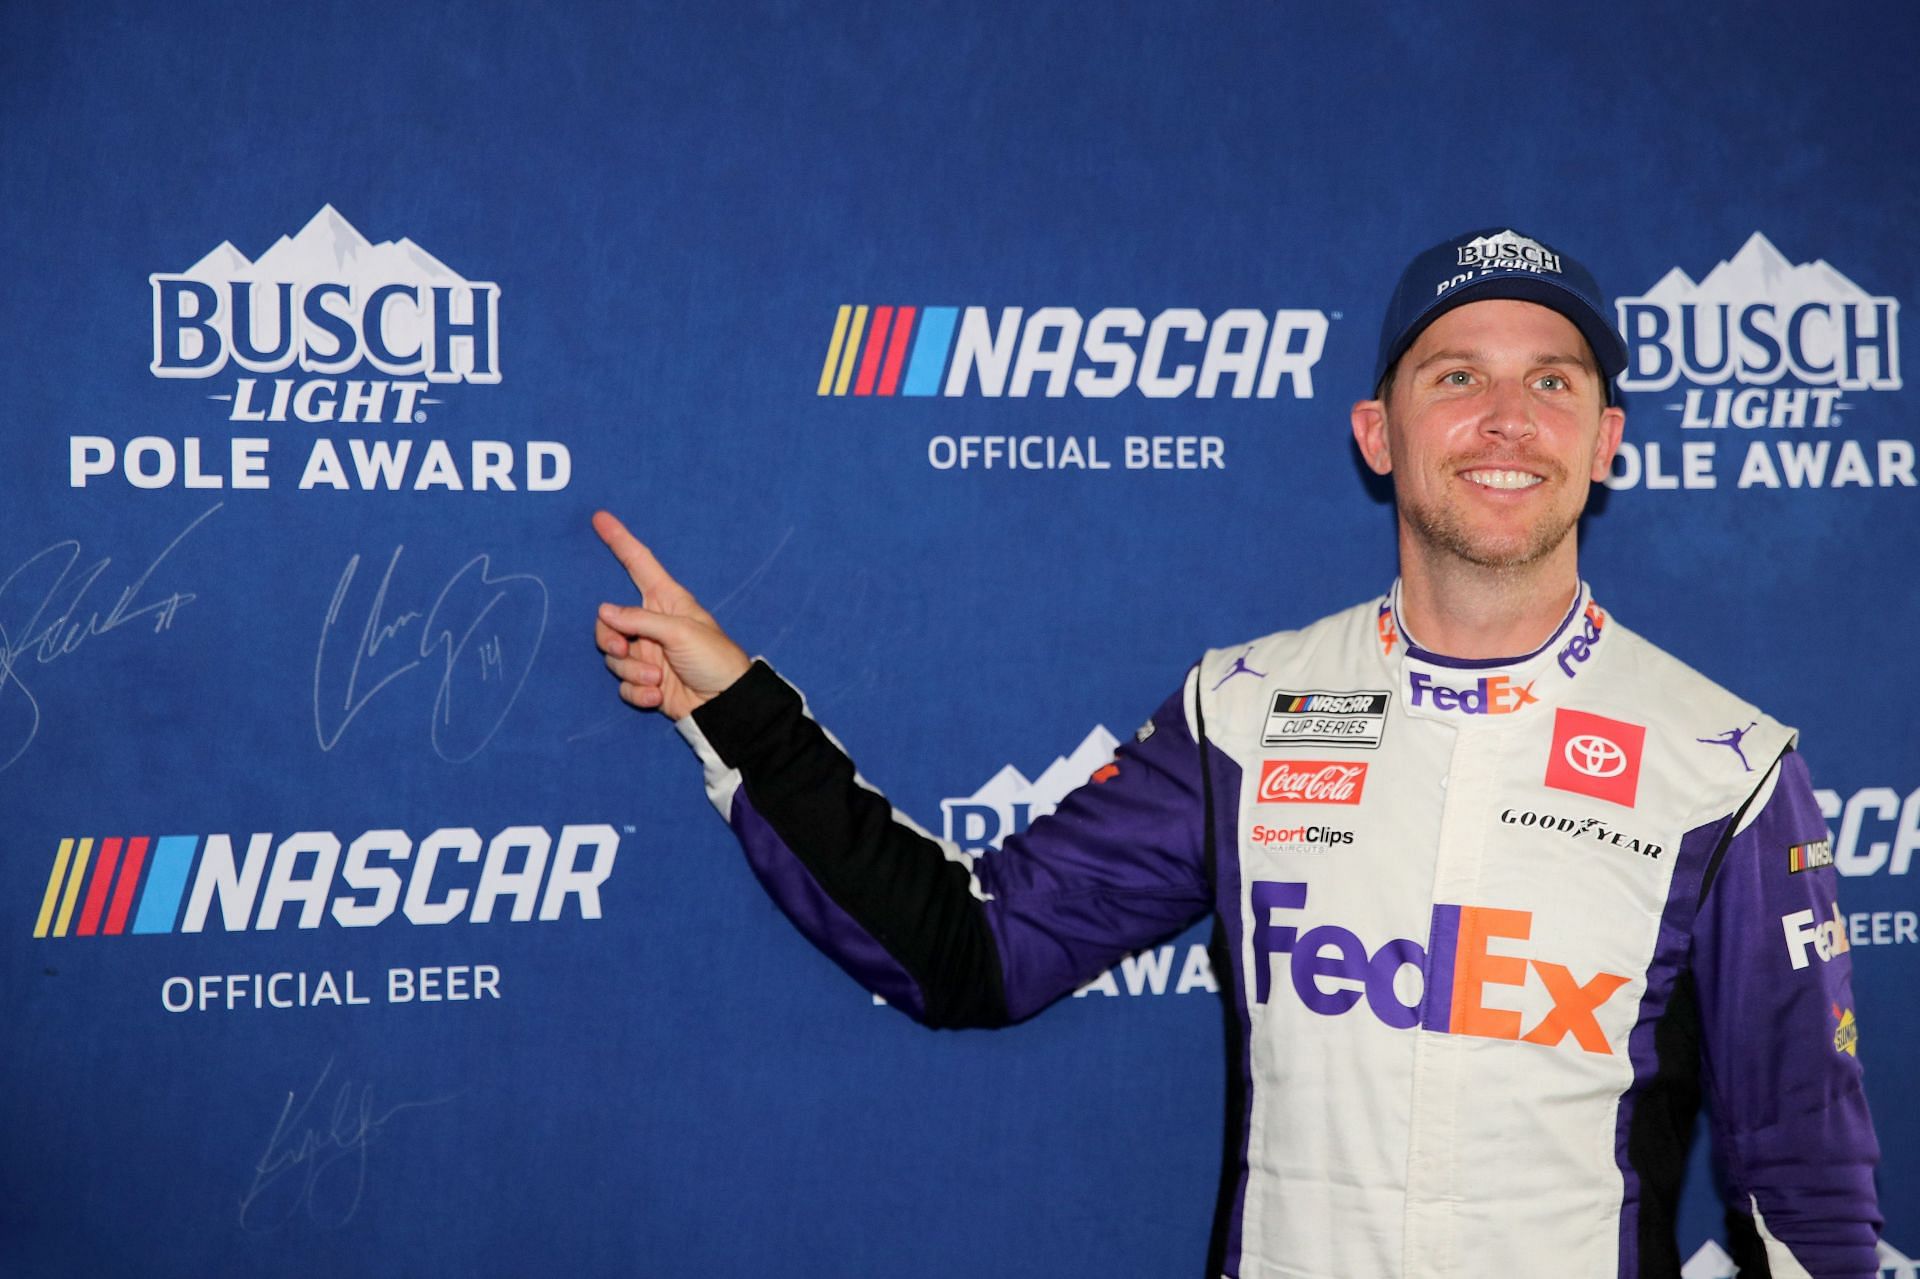 Denny Hamlin points to his signature on the Busch Light Pole Award backdrop after winning the pole award for the NASCAR Cup Series Ally 400 at Nashville Superspeedway